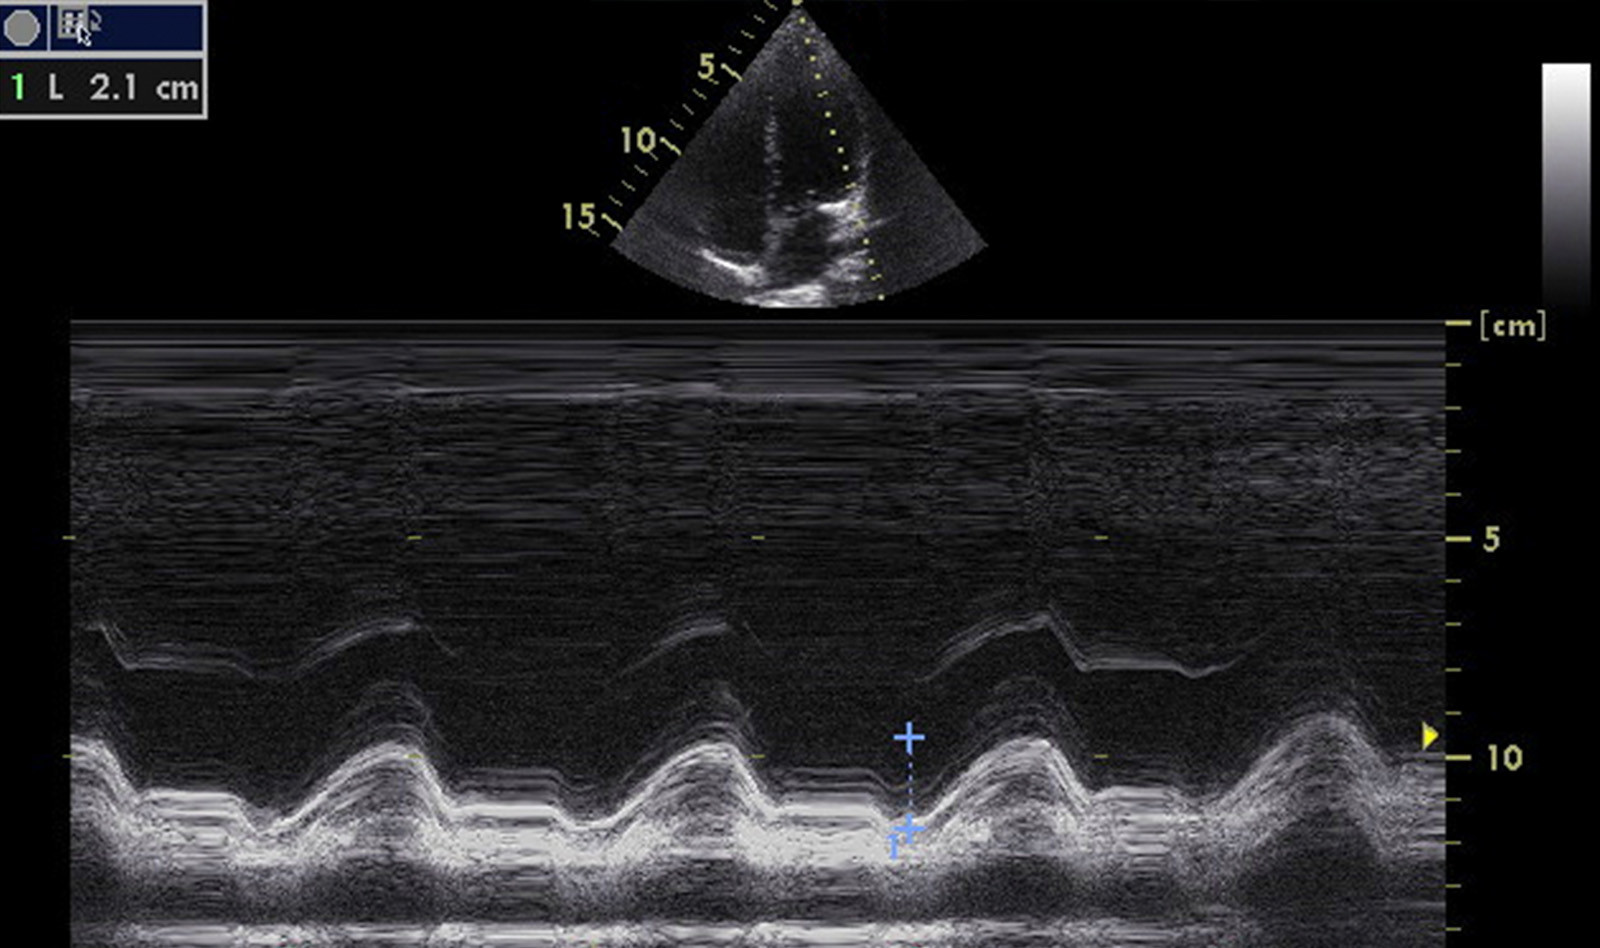 Image of point of care ultrasound point of care ultrasound point of care ultrasound point of care ultrasound point of care ultrasound point of care ultrasound point of care ultrasound point of care ultrasound point of care ultrasound Pediatric POCUS pediatric emergency    Online PoCUS Training